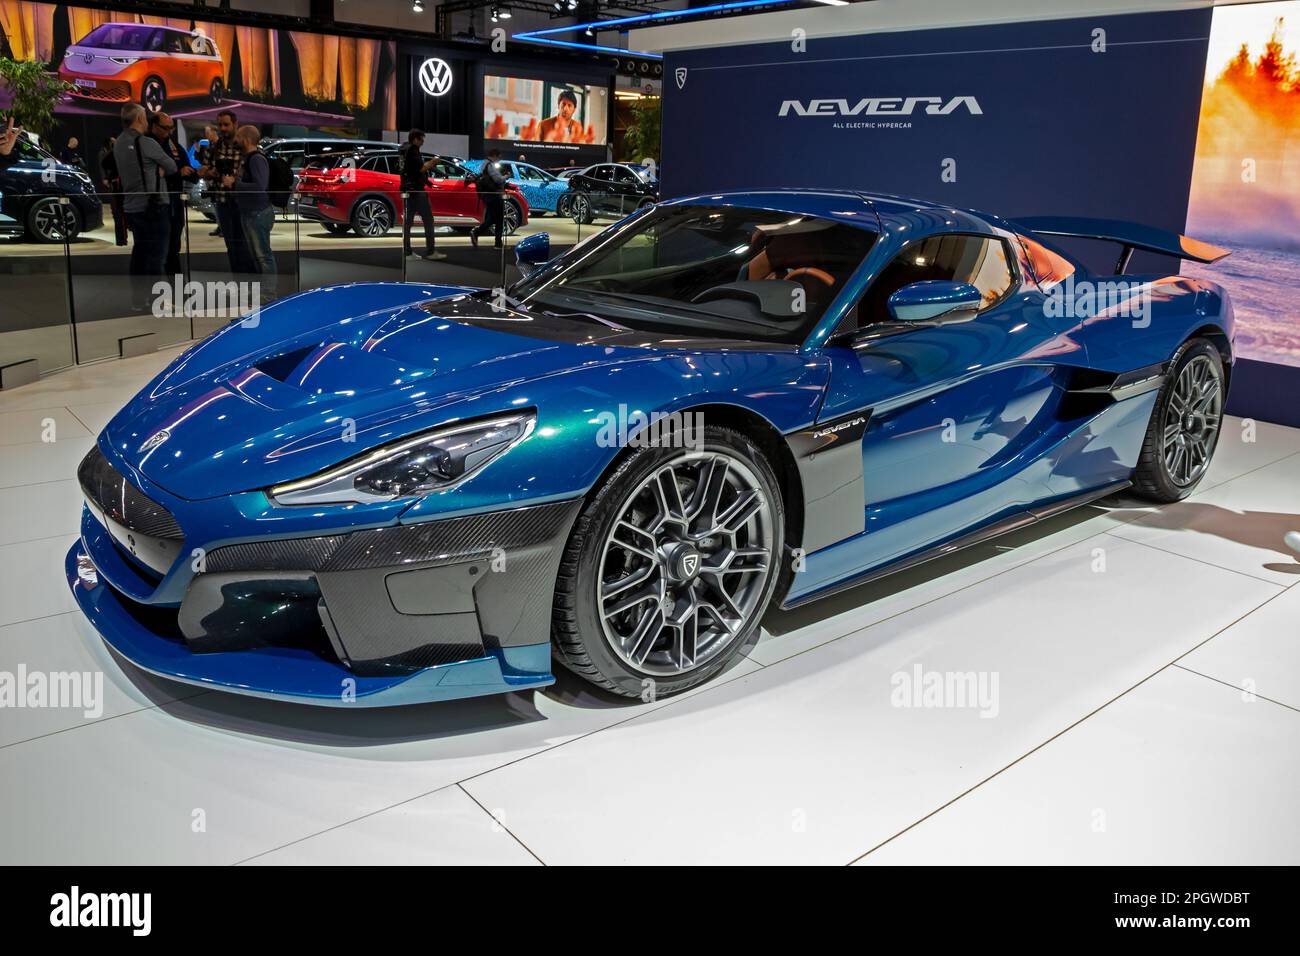 Rimac Nevera all-electric sports car at the Brussels Autosalon European Motor Show. Brussels, Belgium - January 13, 2023. Stock Photo